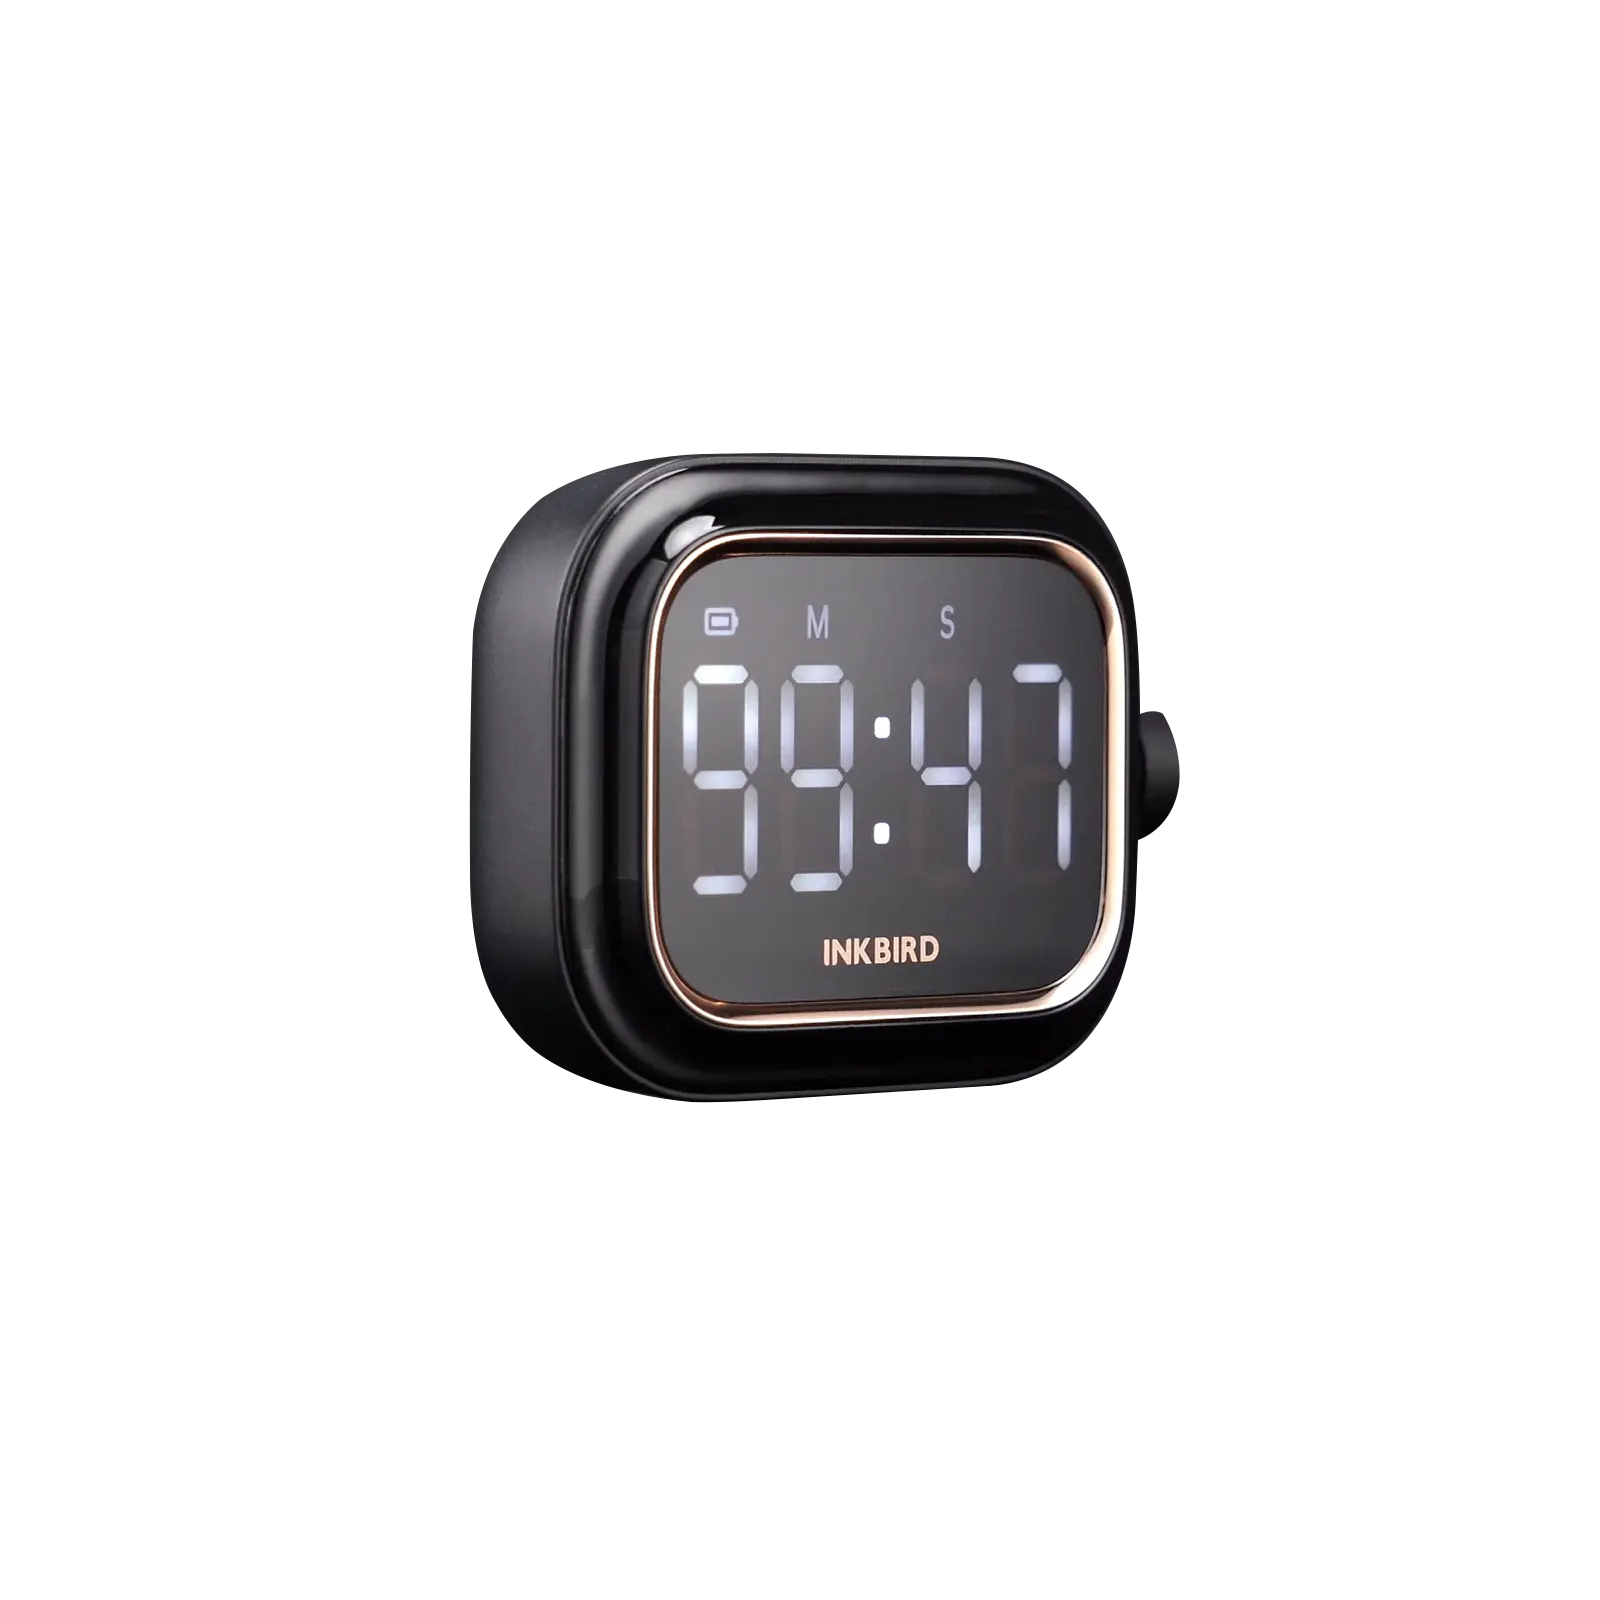 INKBIRD IDT-O2 Digital Timer  Count-Up/Count-Down Timer with Large Backlit LED for Jogging  Yoga  Meeting  Study  Reading